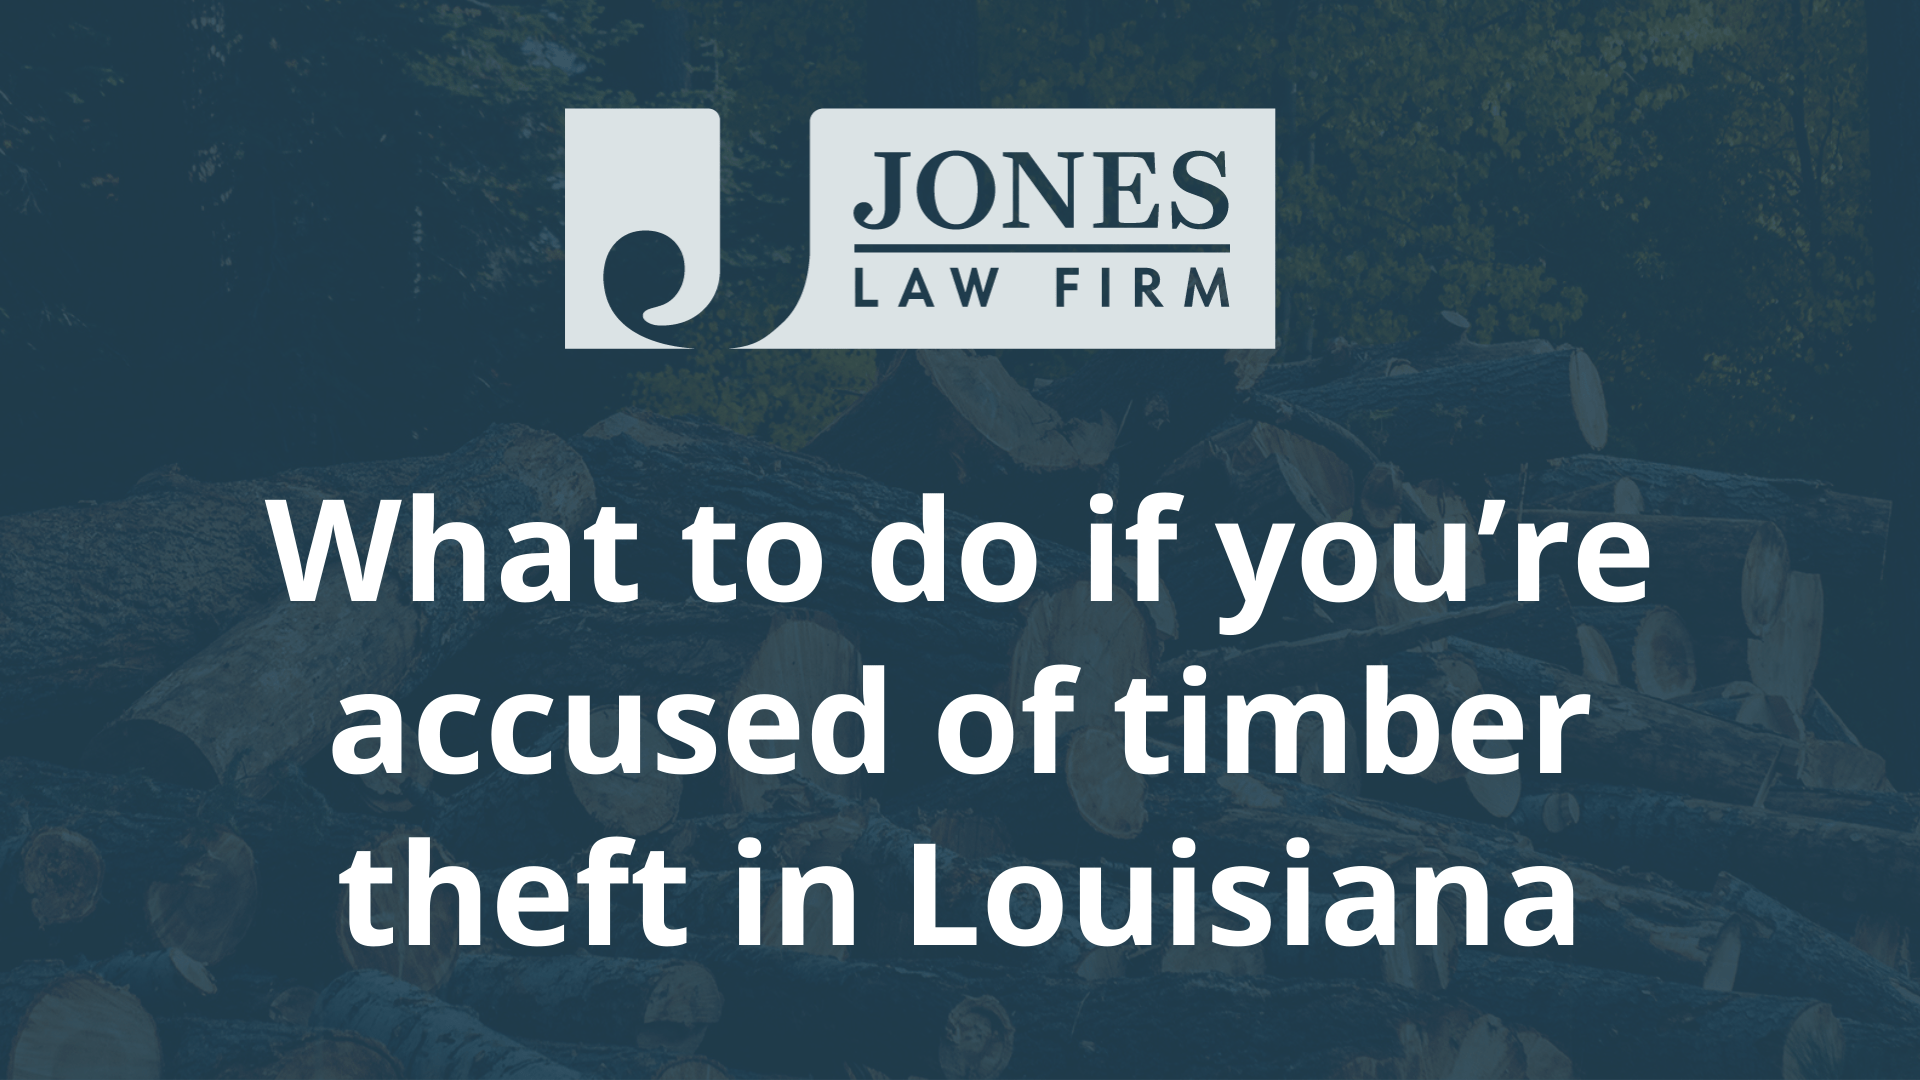 What to do if you’re accused of timber theft in Louisiana - jones law firm - louisiana